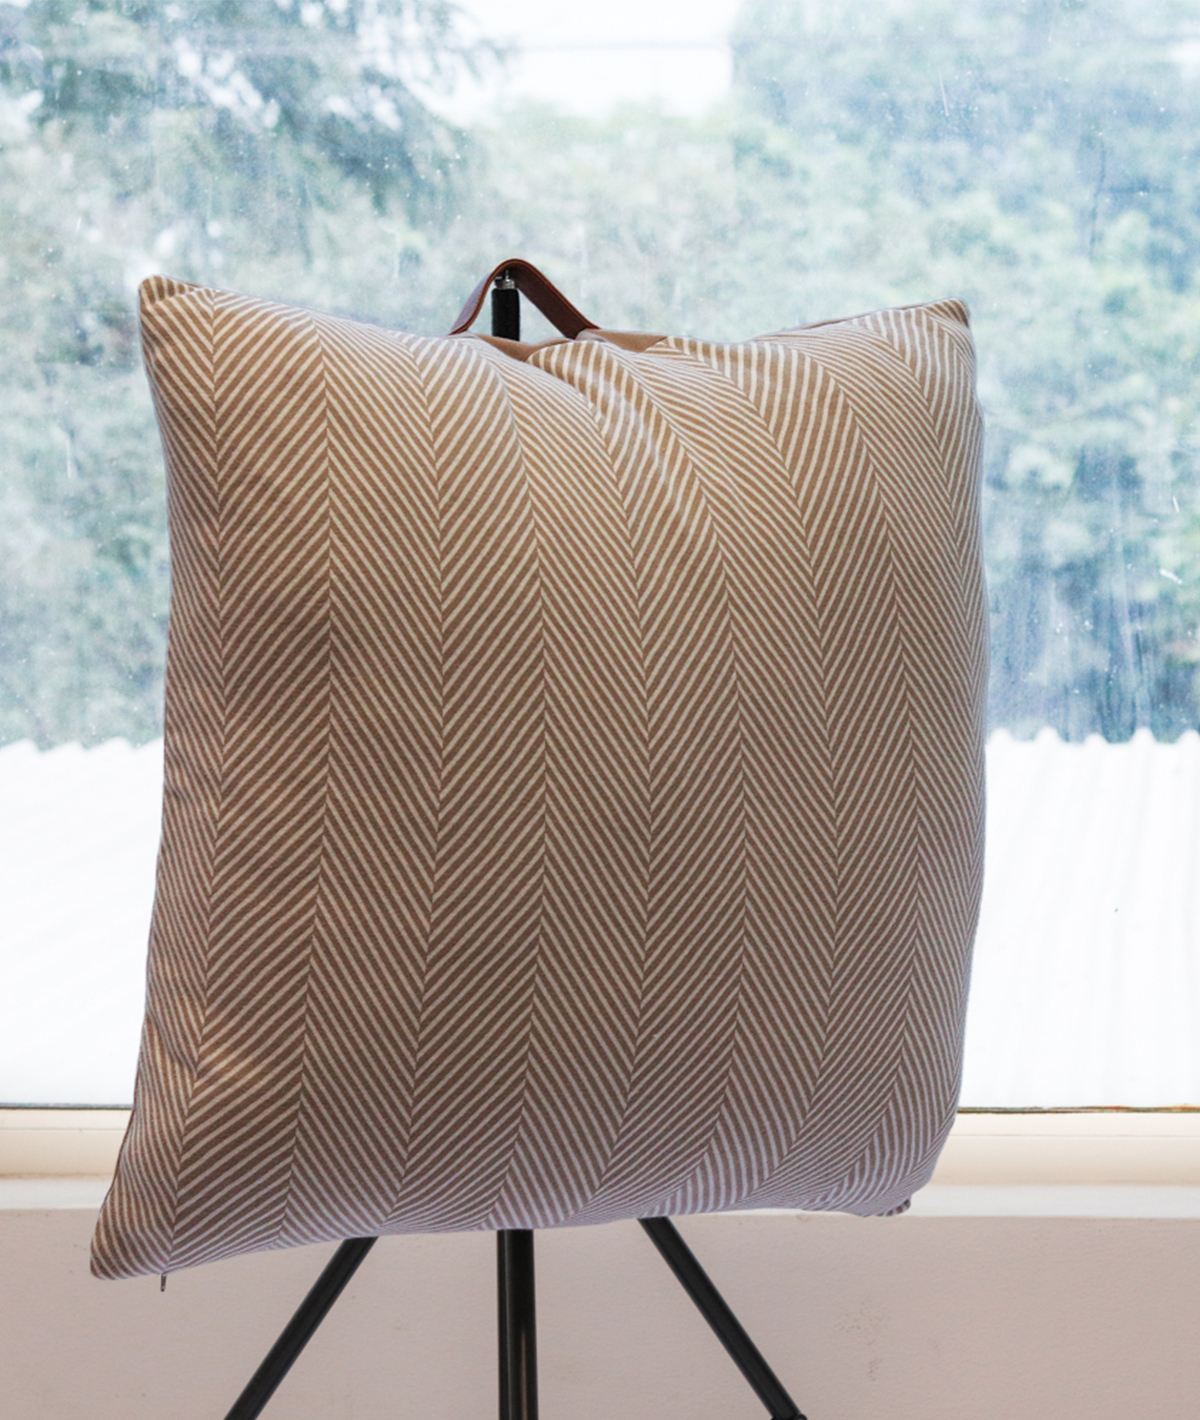 buy online Cushion cover